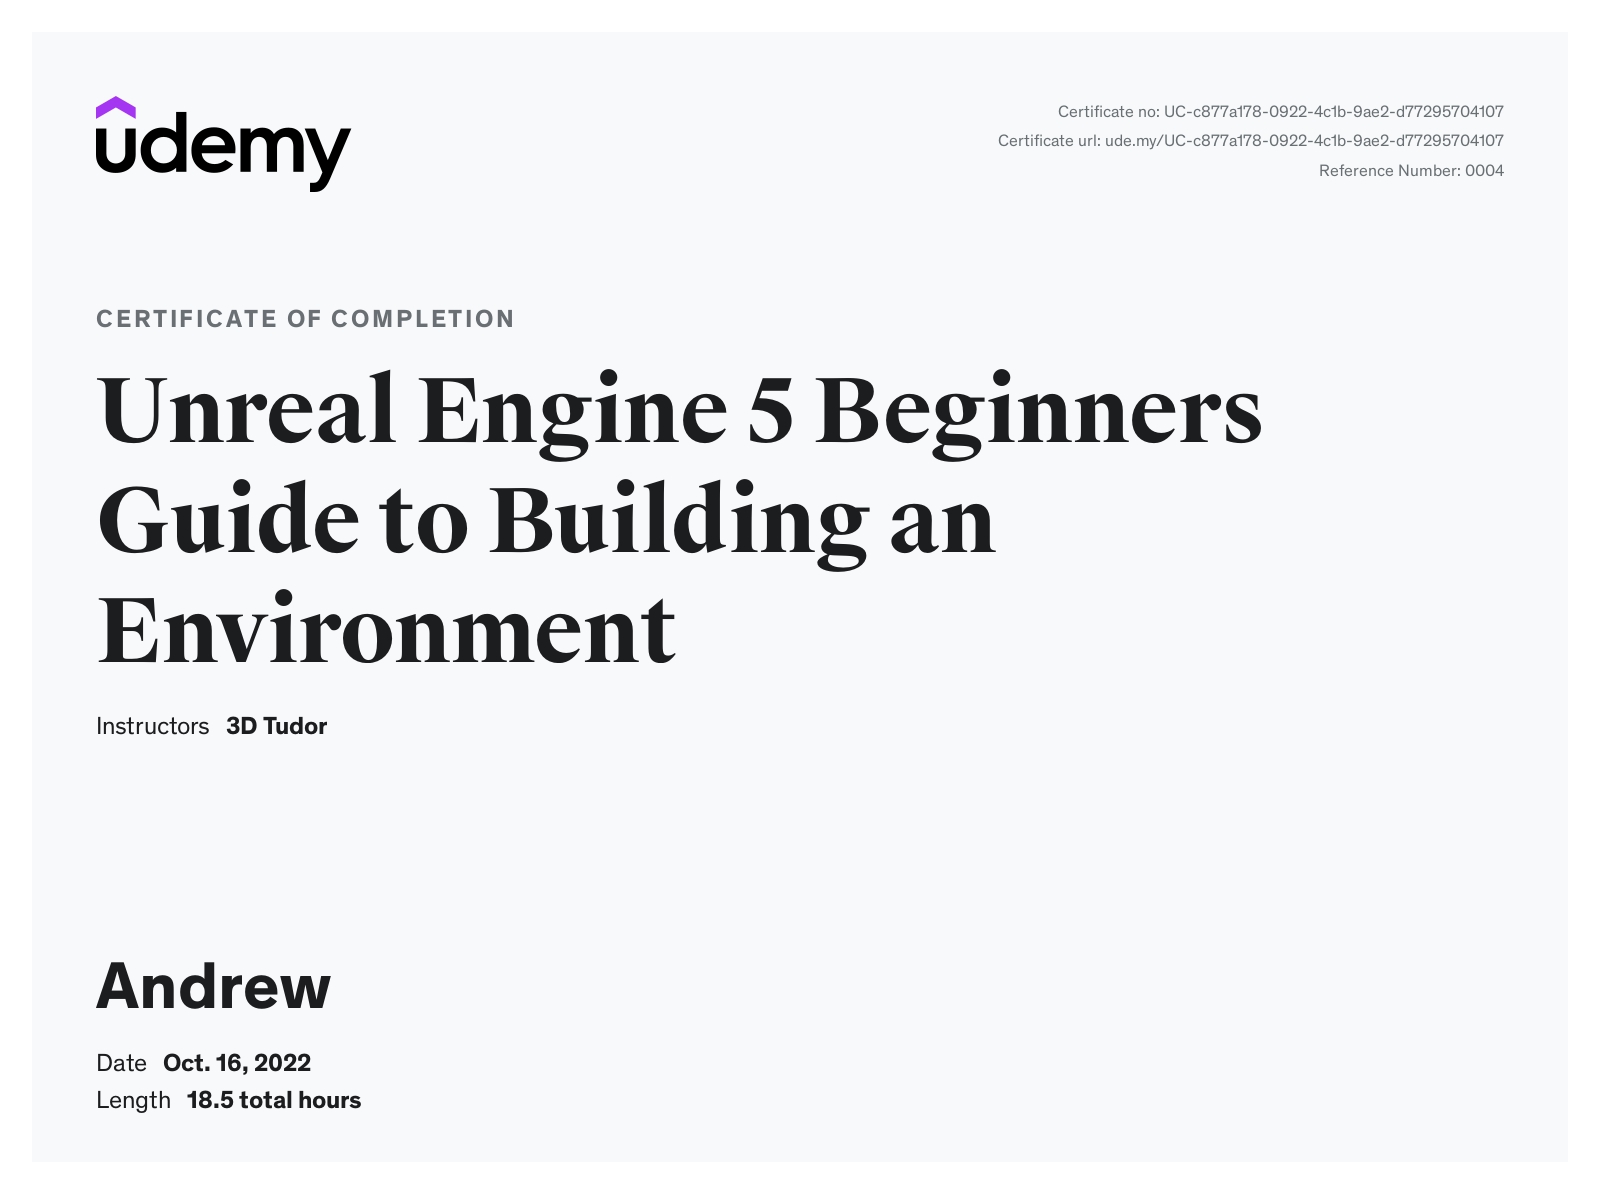 Unreal Engine 5: The Complete Beginner's Course